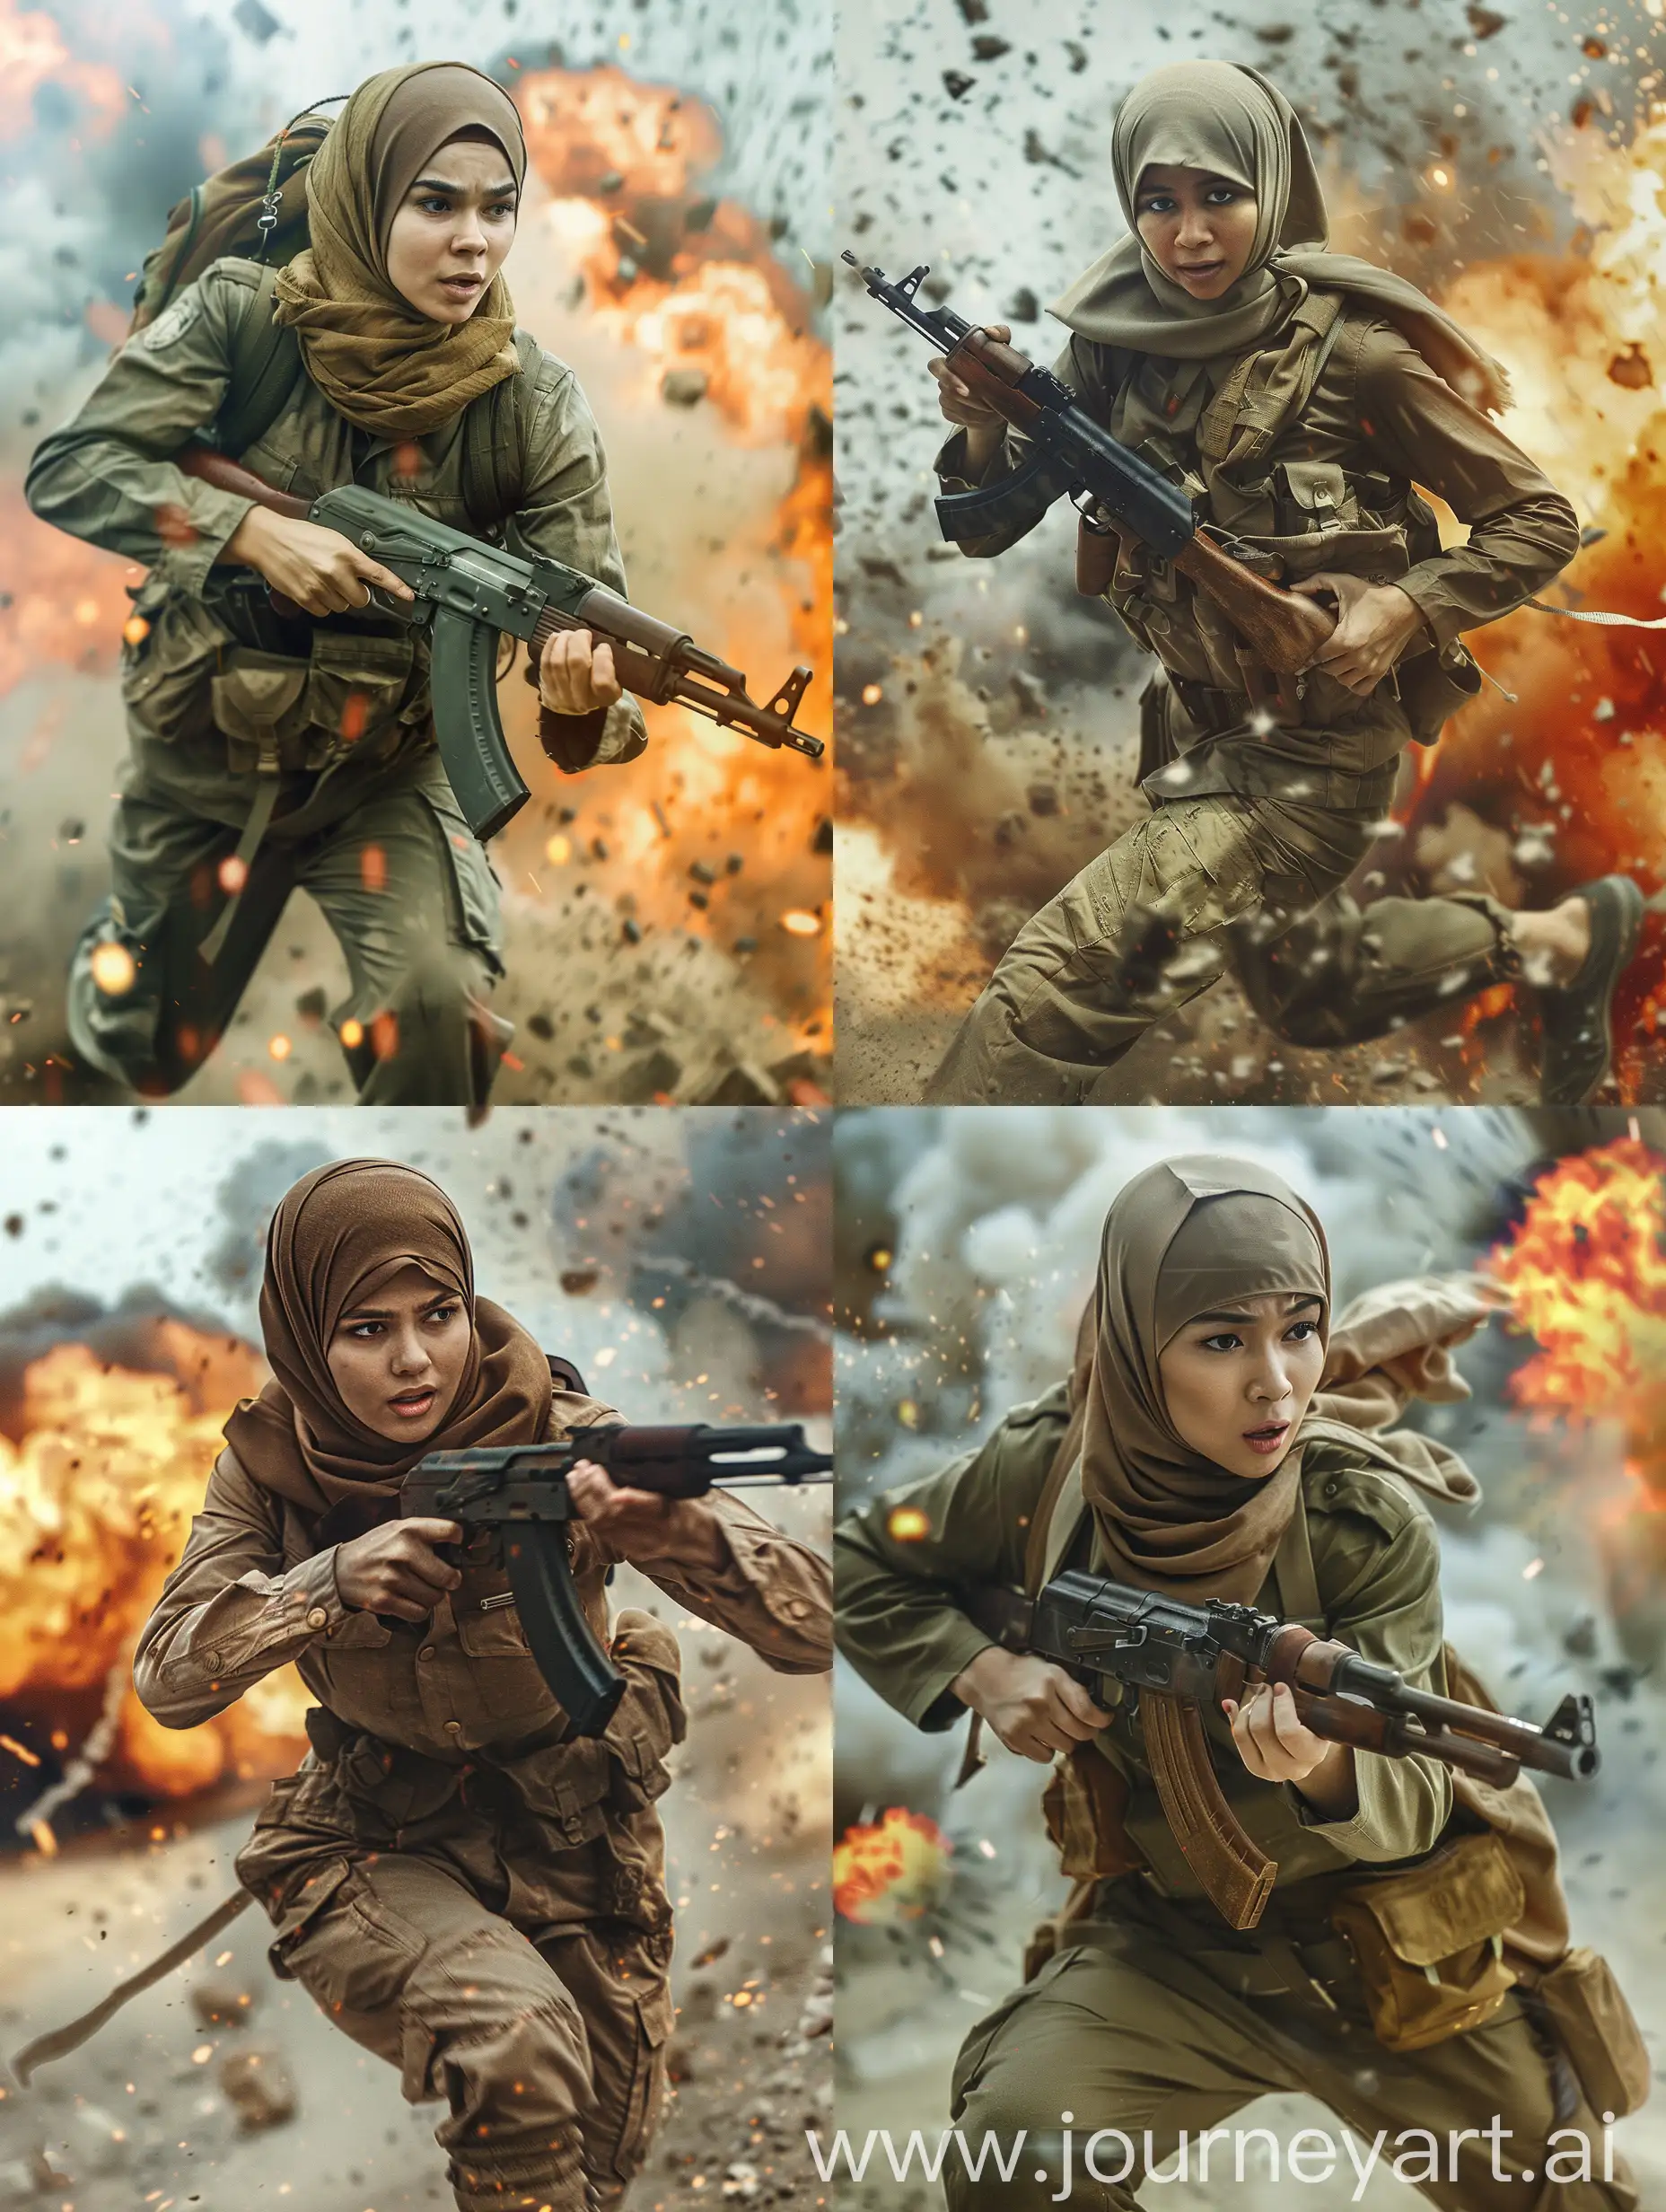 Courageous-Hijab-Woman-in-WWII-Soldier-Costume-Evades-Explosions-with-AK47